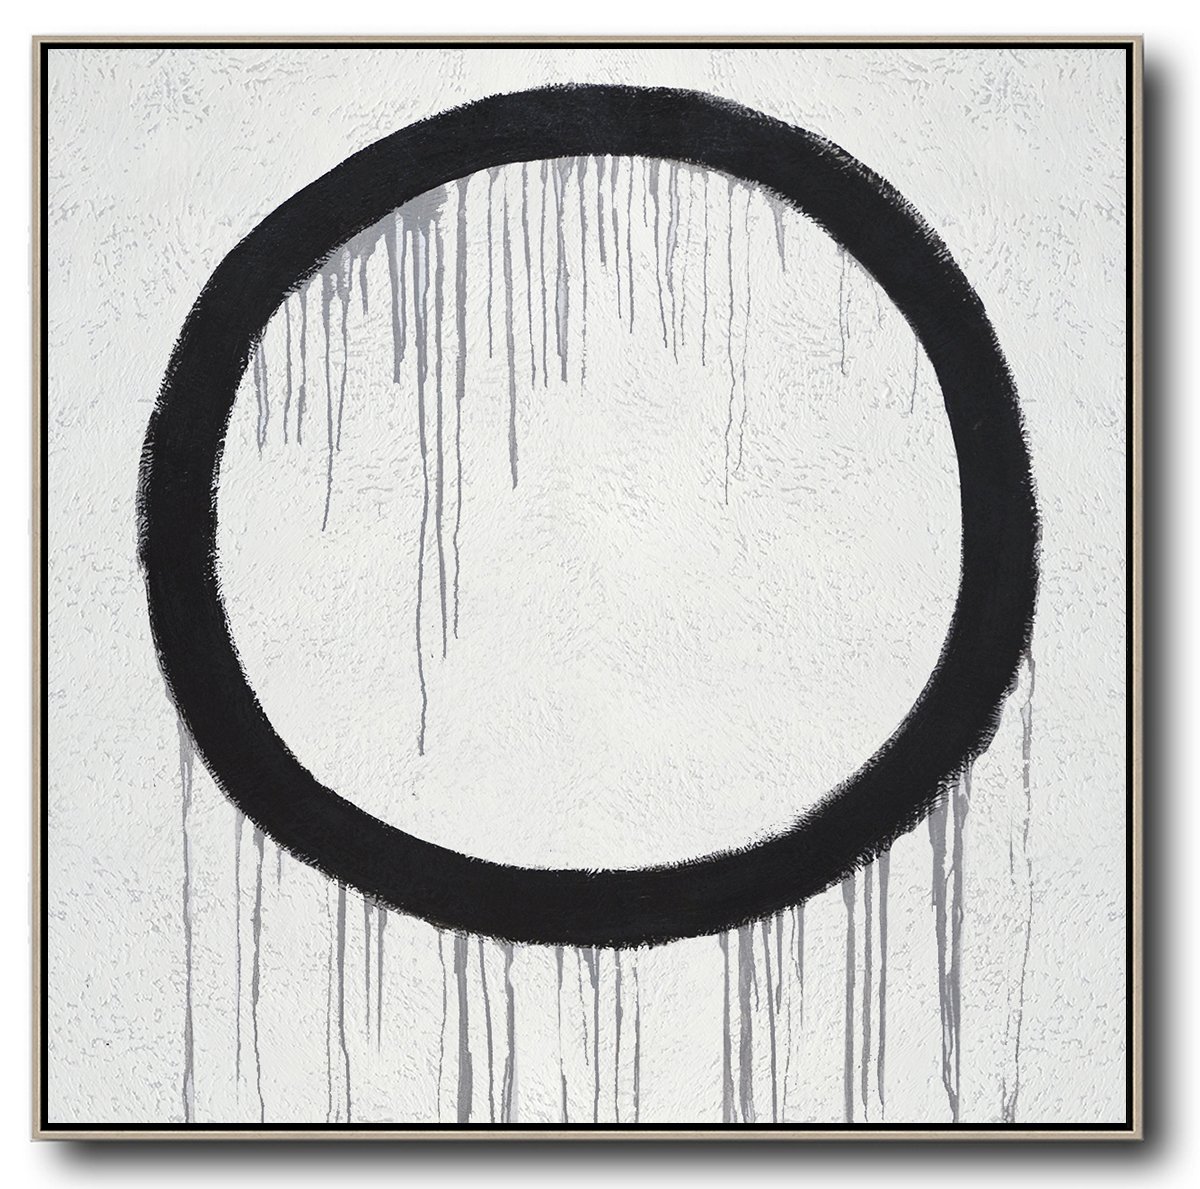 Large Abstract Art,Minimalist Drip Painting On Canvas, Black, White, Grey - Modern Art Abstract Painting